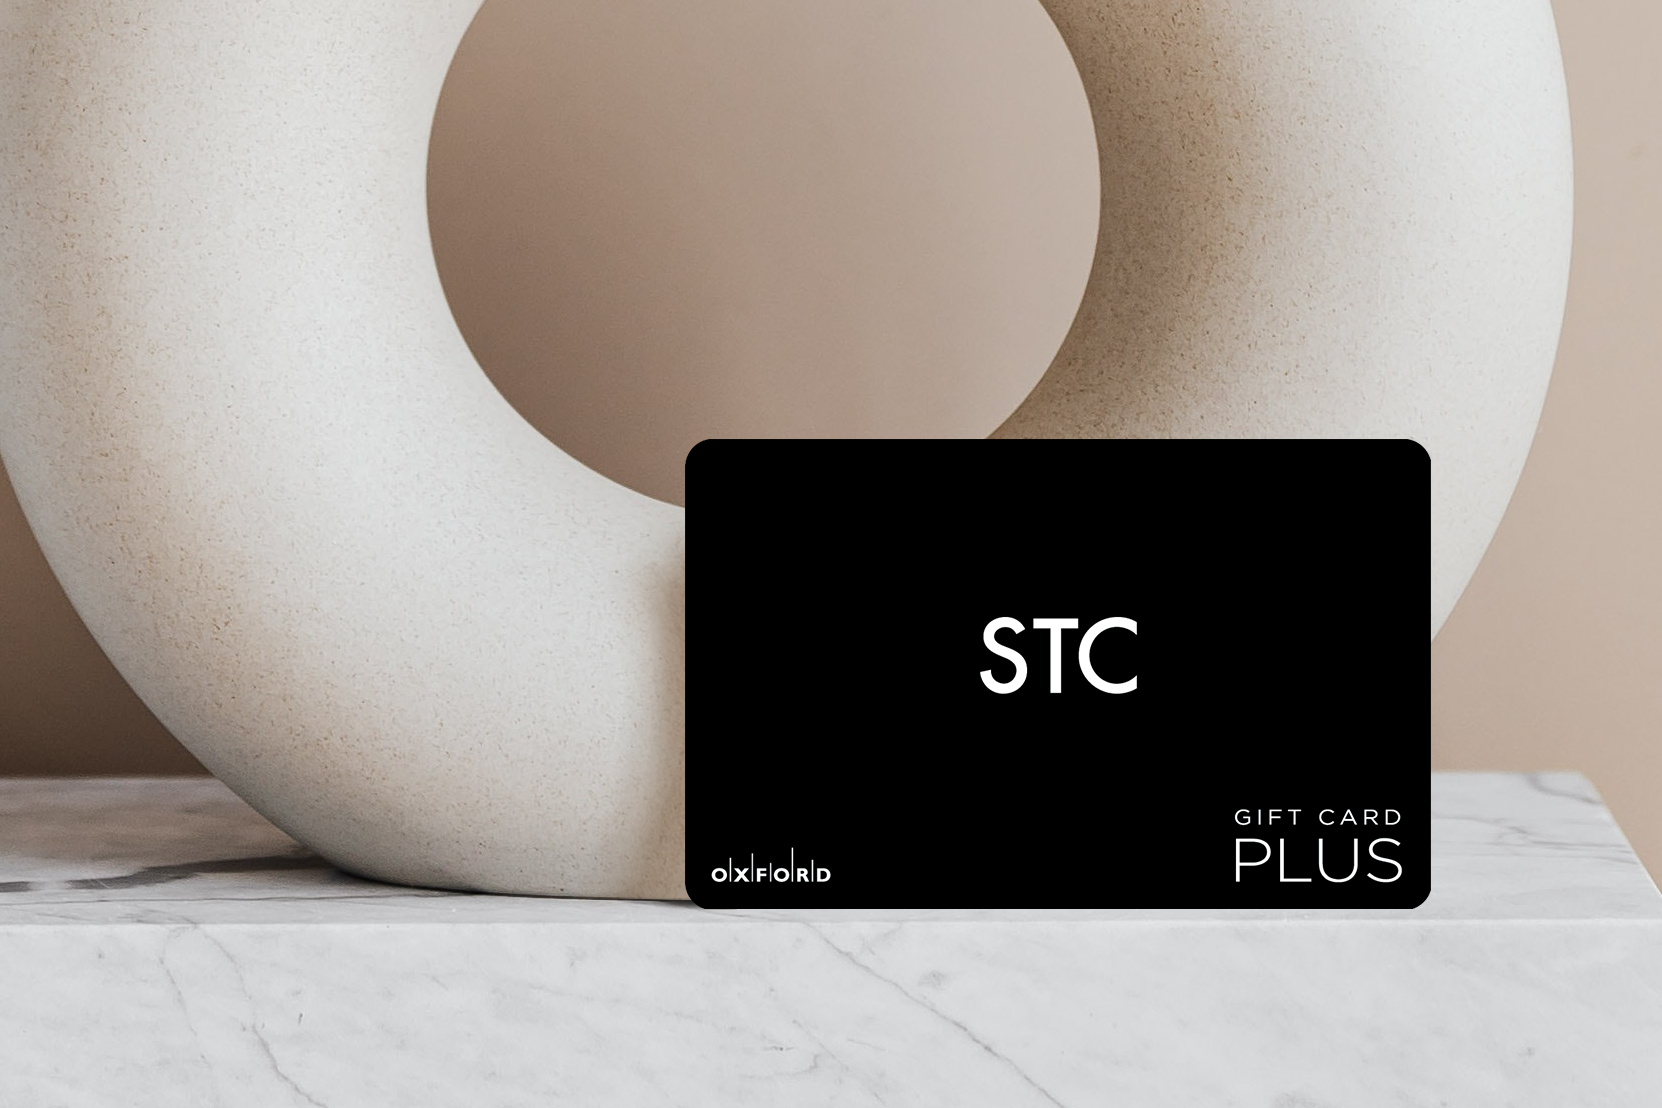 promotional image of a black STC gift card in front of a neutral circular vase